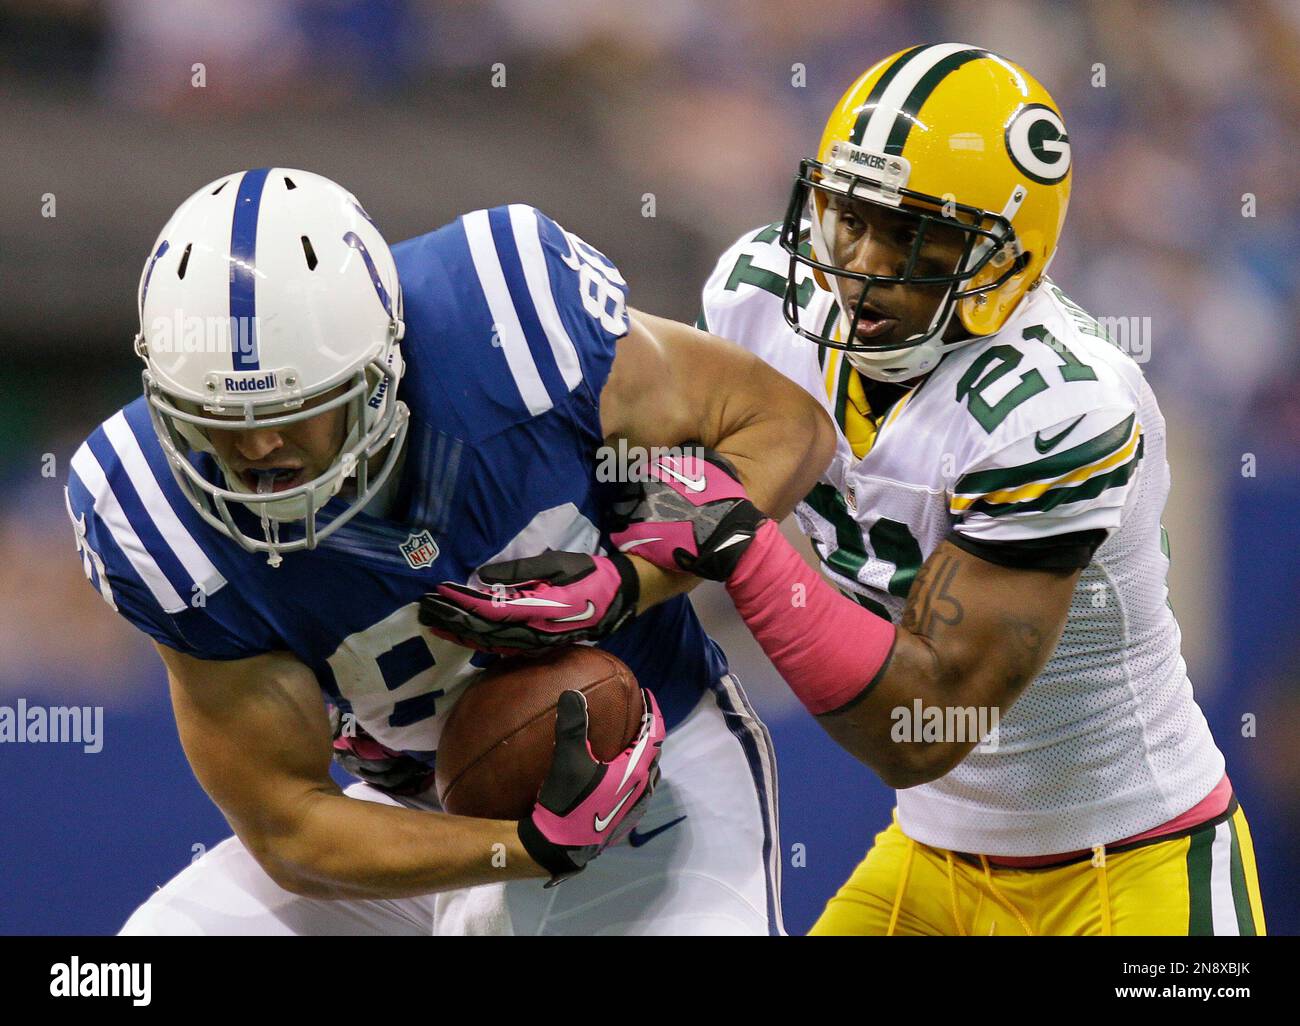 Indianapolis Colts tight end Coby Fleener (80) is tackled by Green